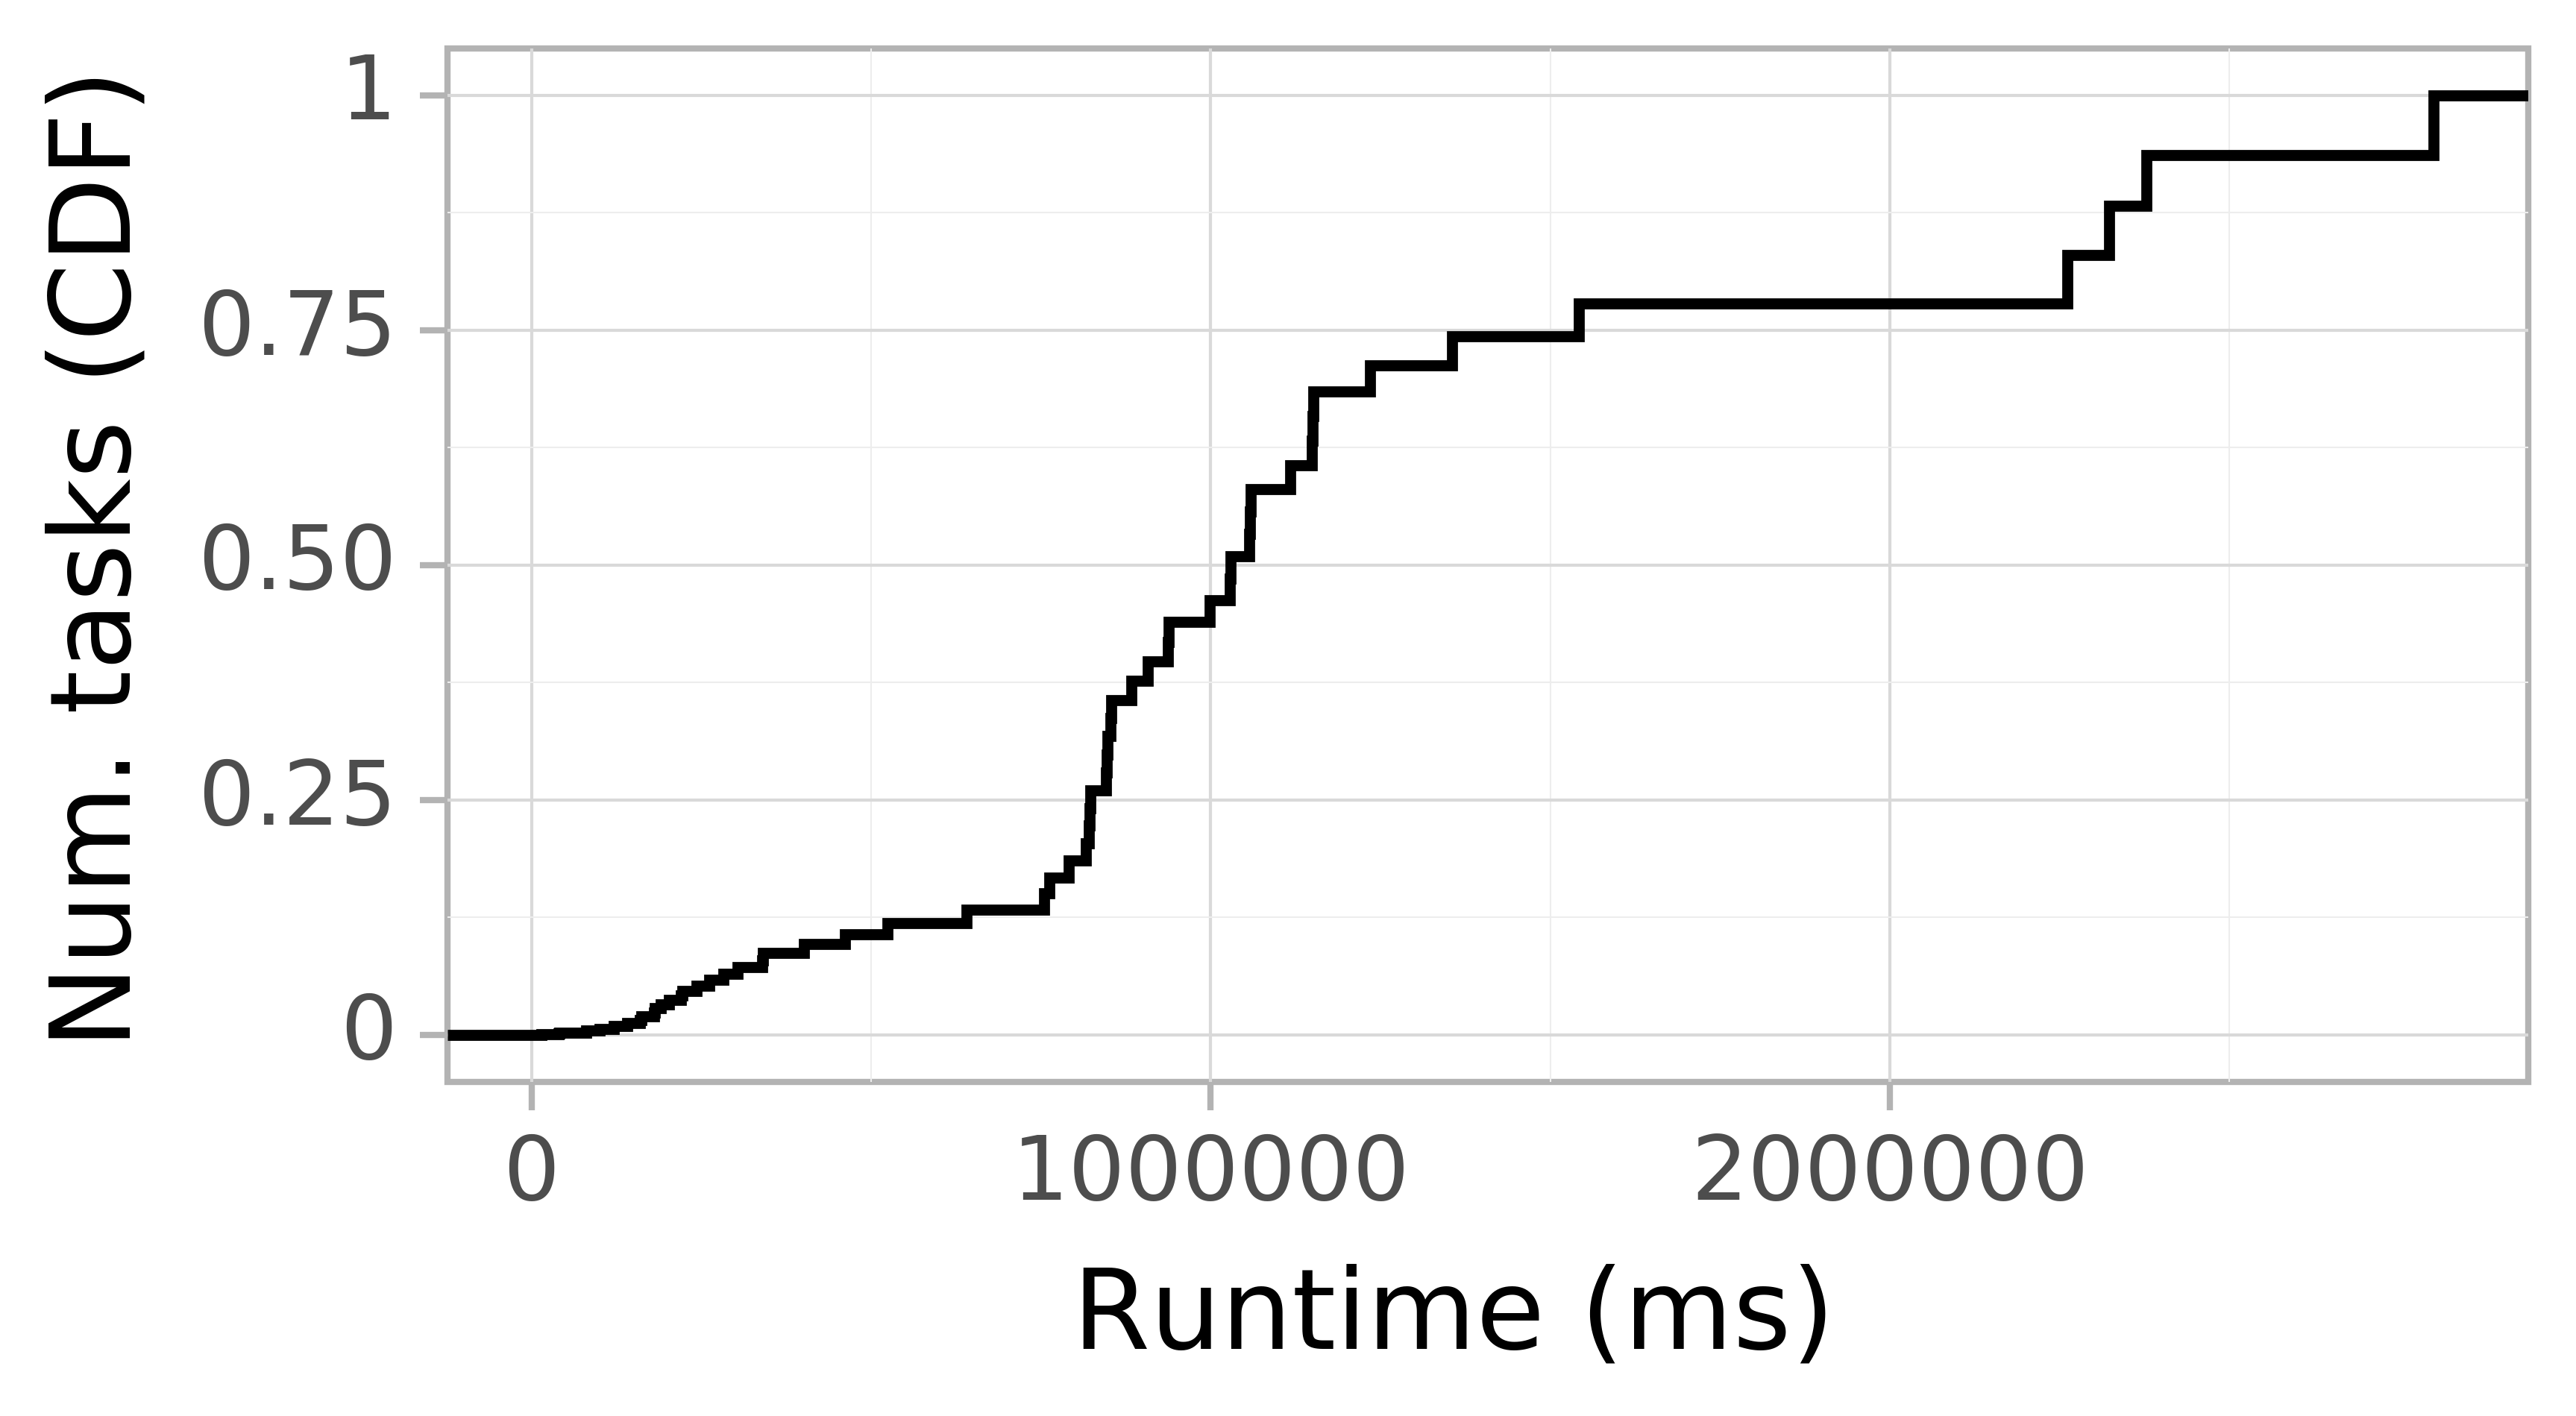 Task runtime CDF graph for the Pegasus_P1 trace.